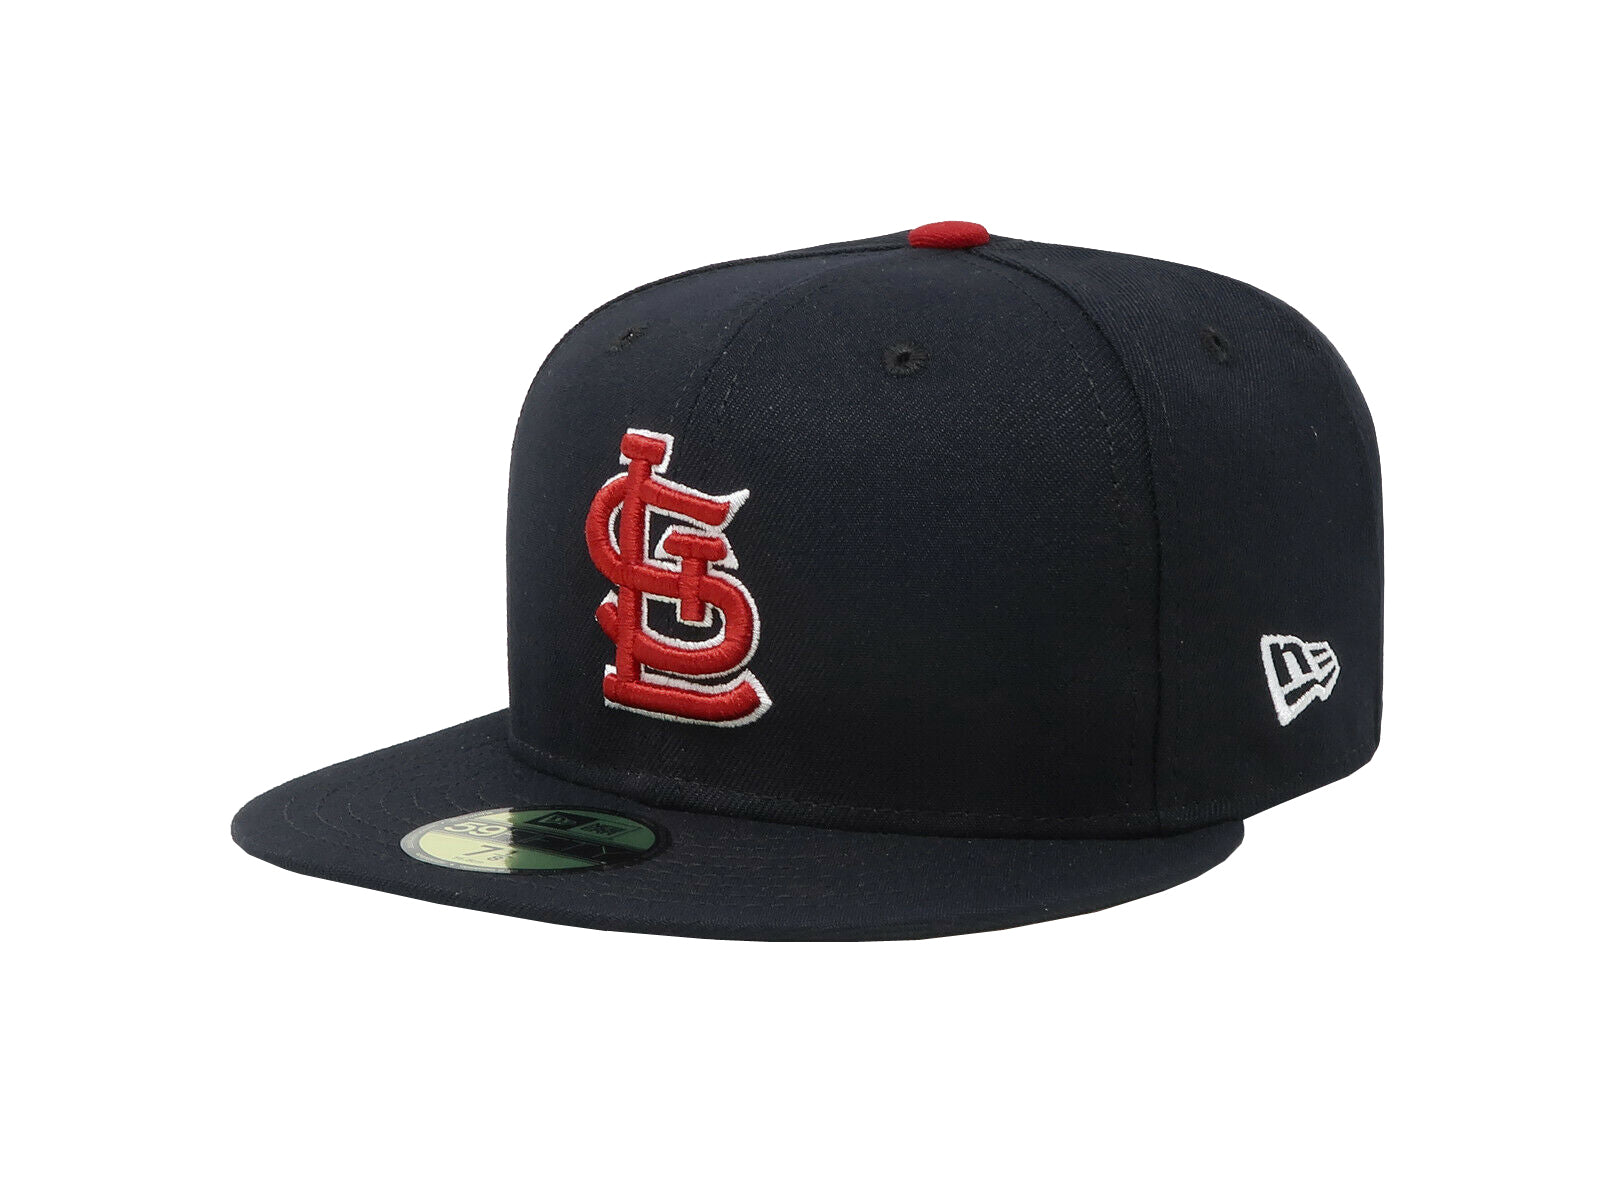 St Louis Cardinals Hat Baseball Cap Fitted 7 1/2 New Era Vintage